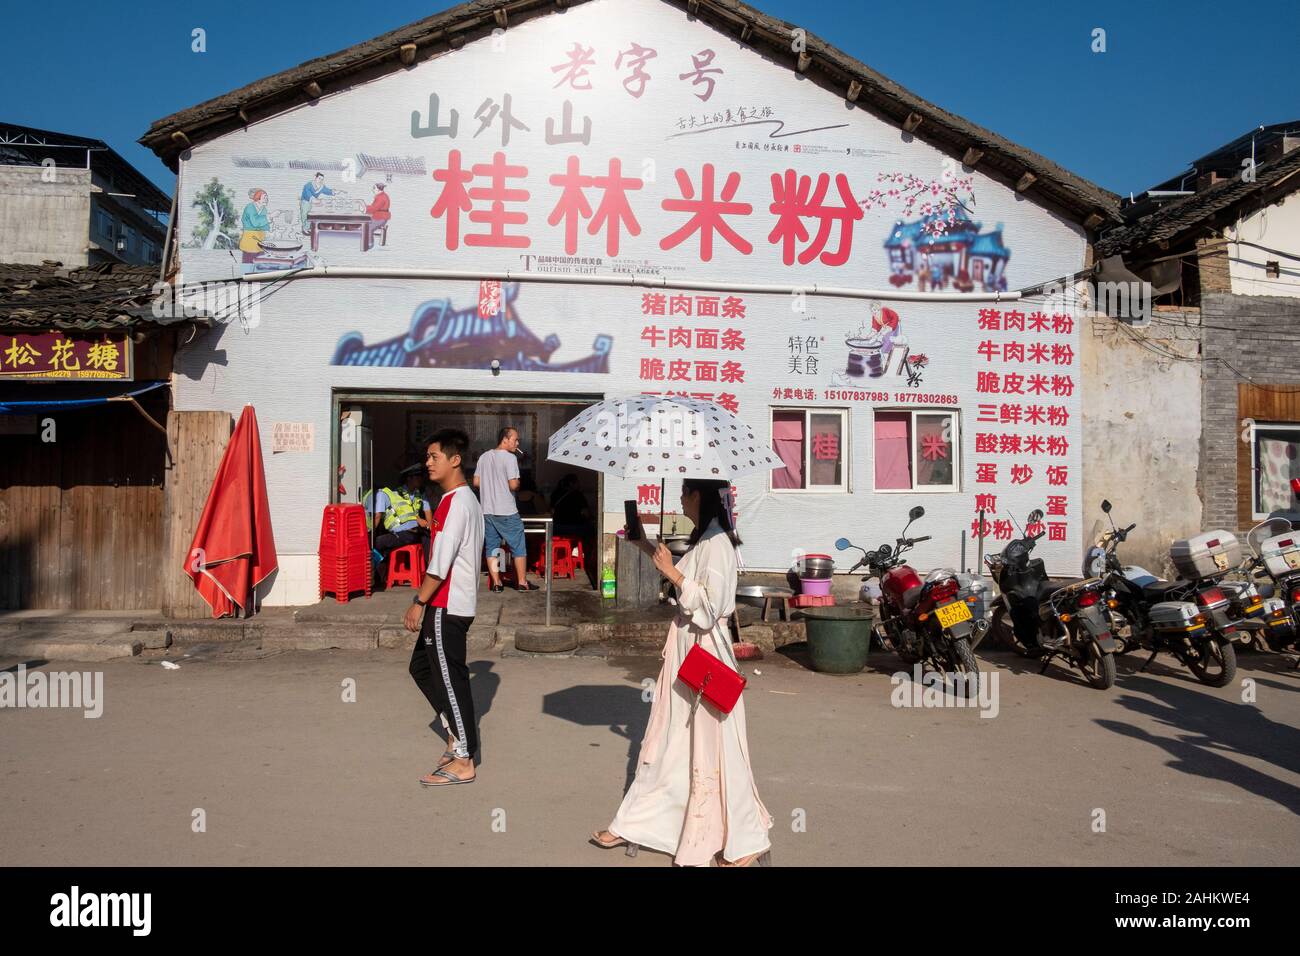 Tourists in Xing Ping, Shaanxi, China Stock Photo